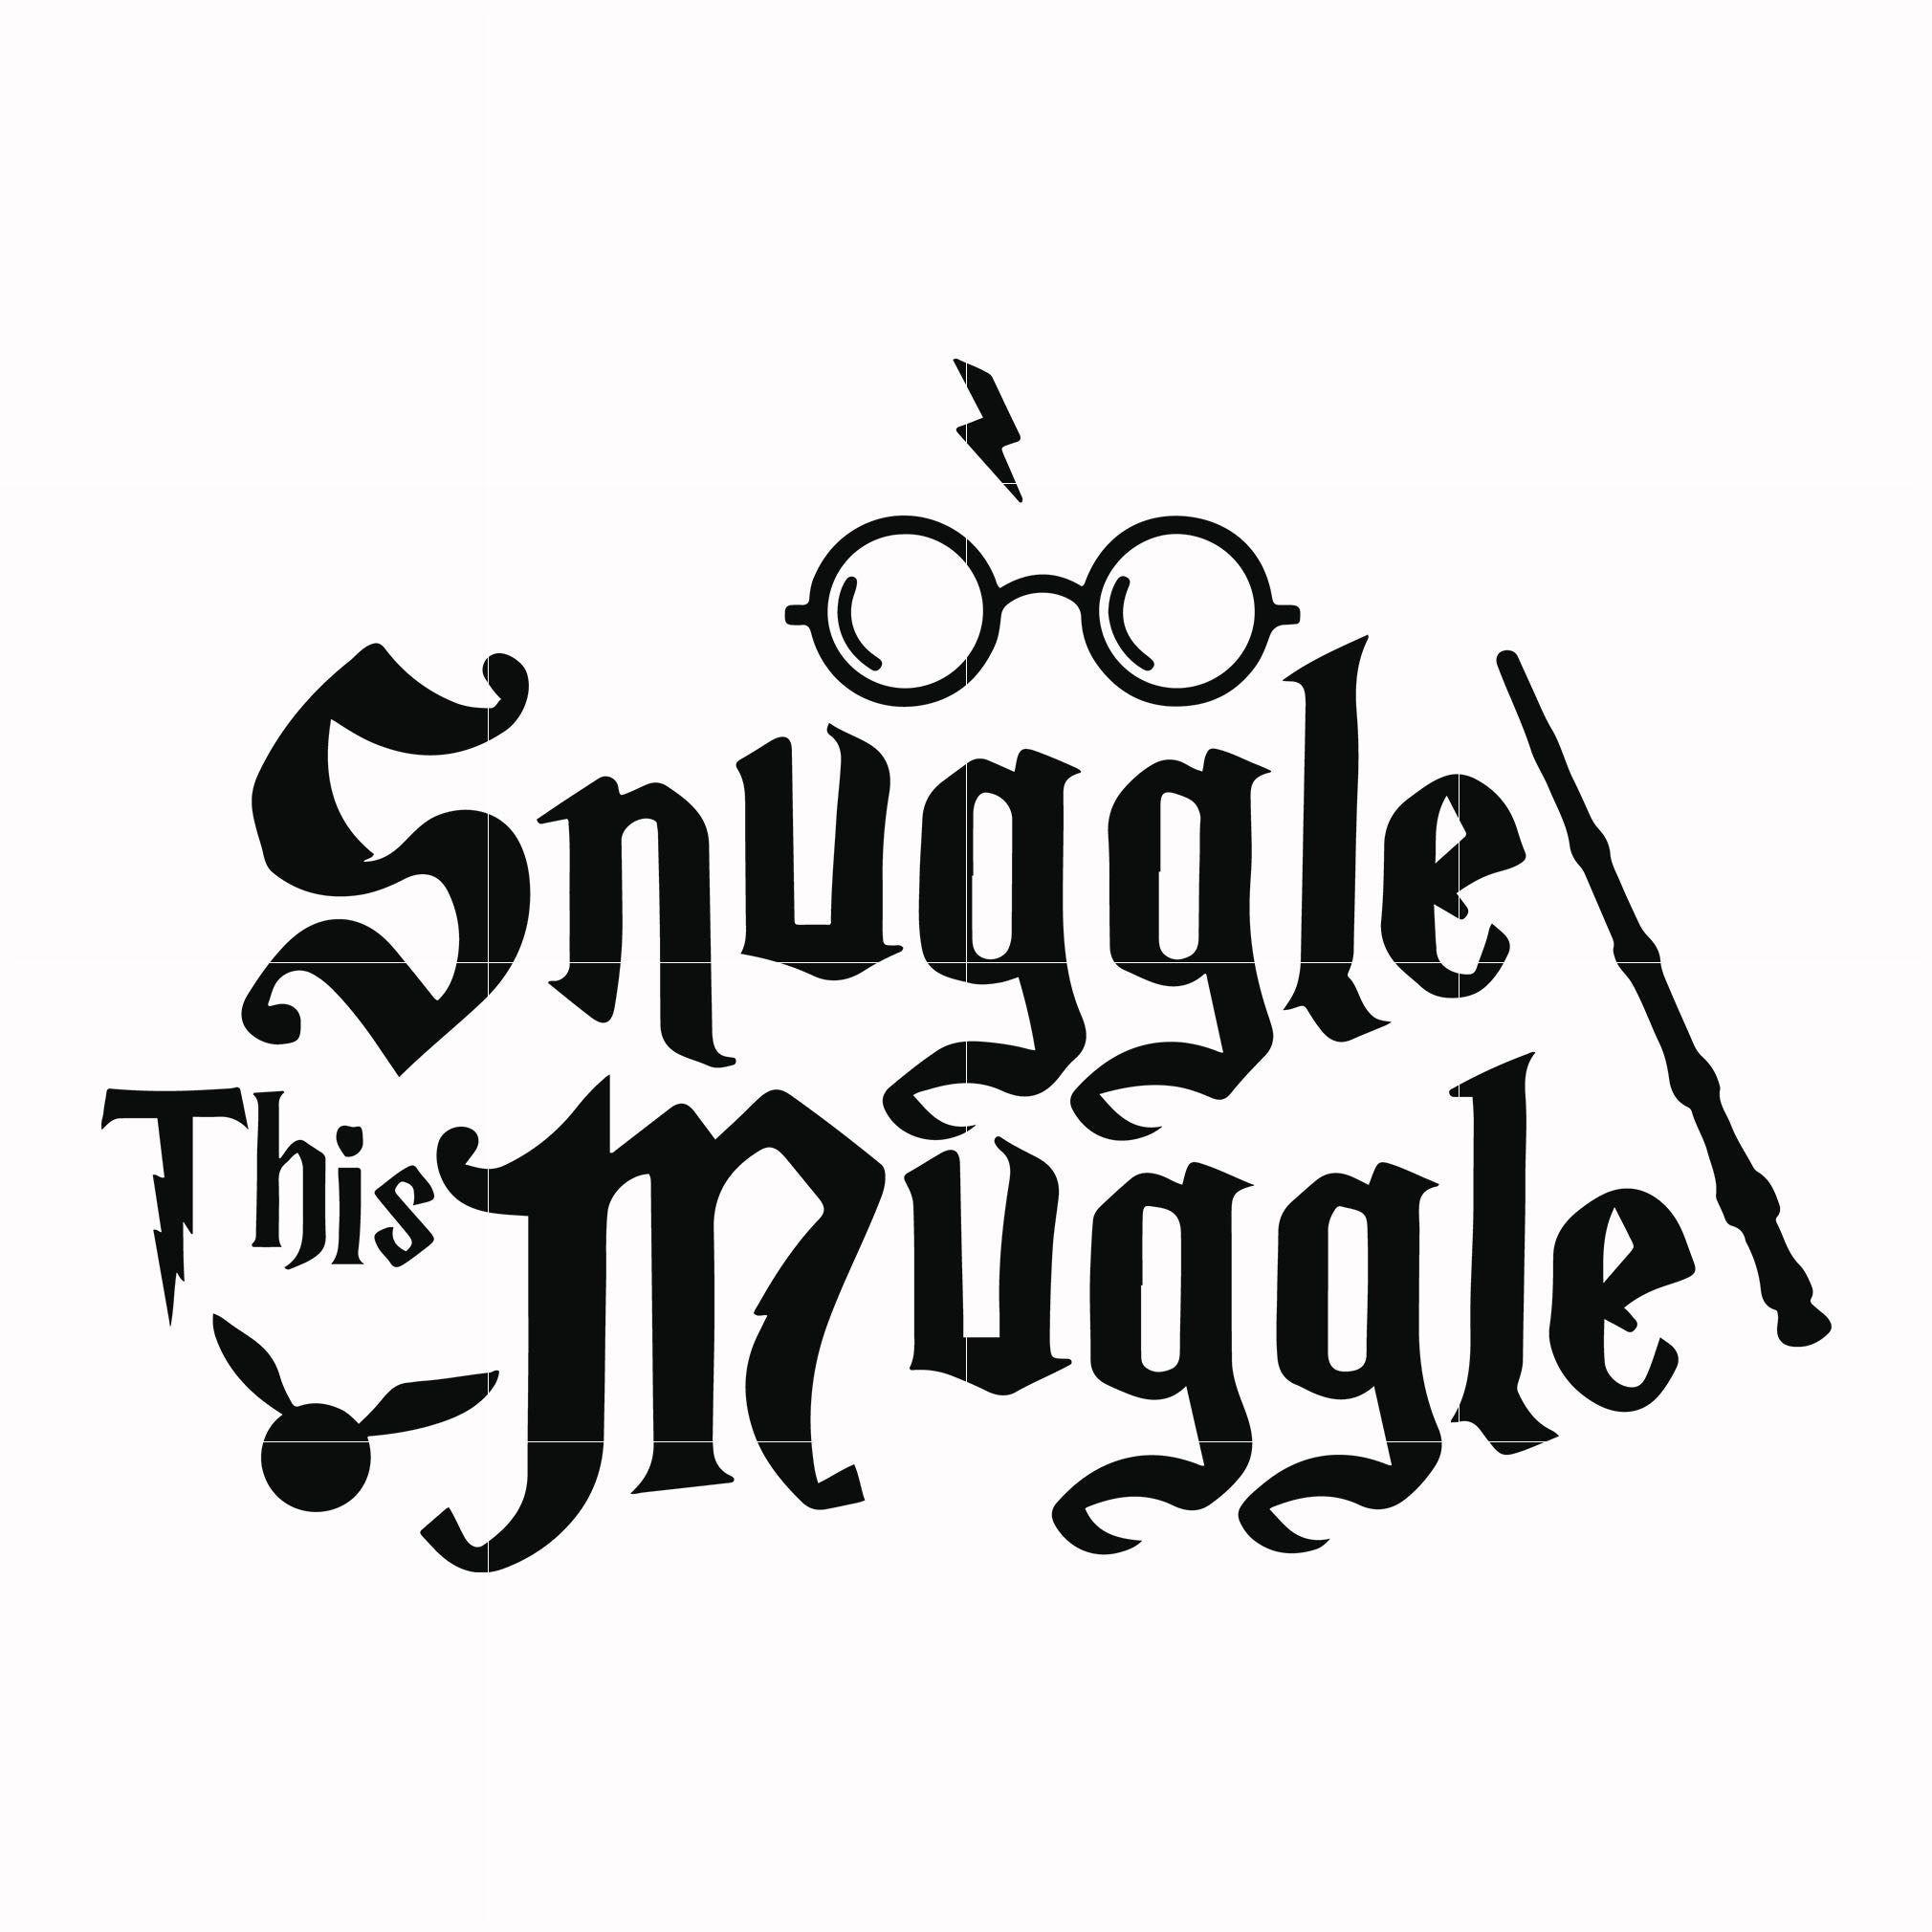 Download This Snuggle This Muggle Svg Png Dxf Eps File Hrpt0009 Dreamsvg Store